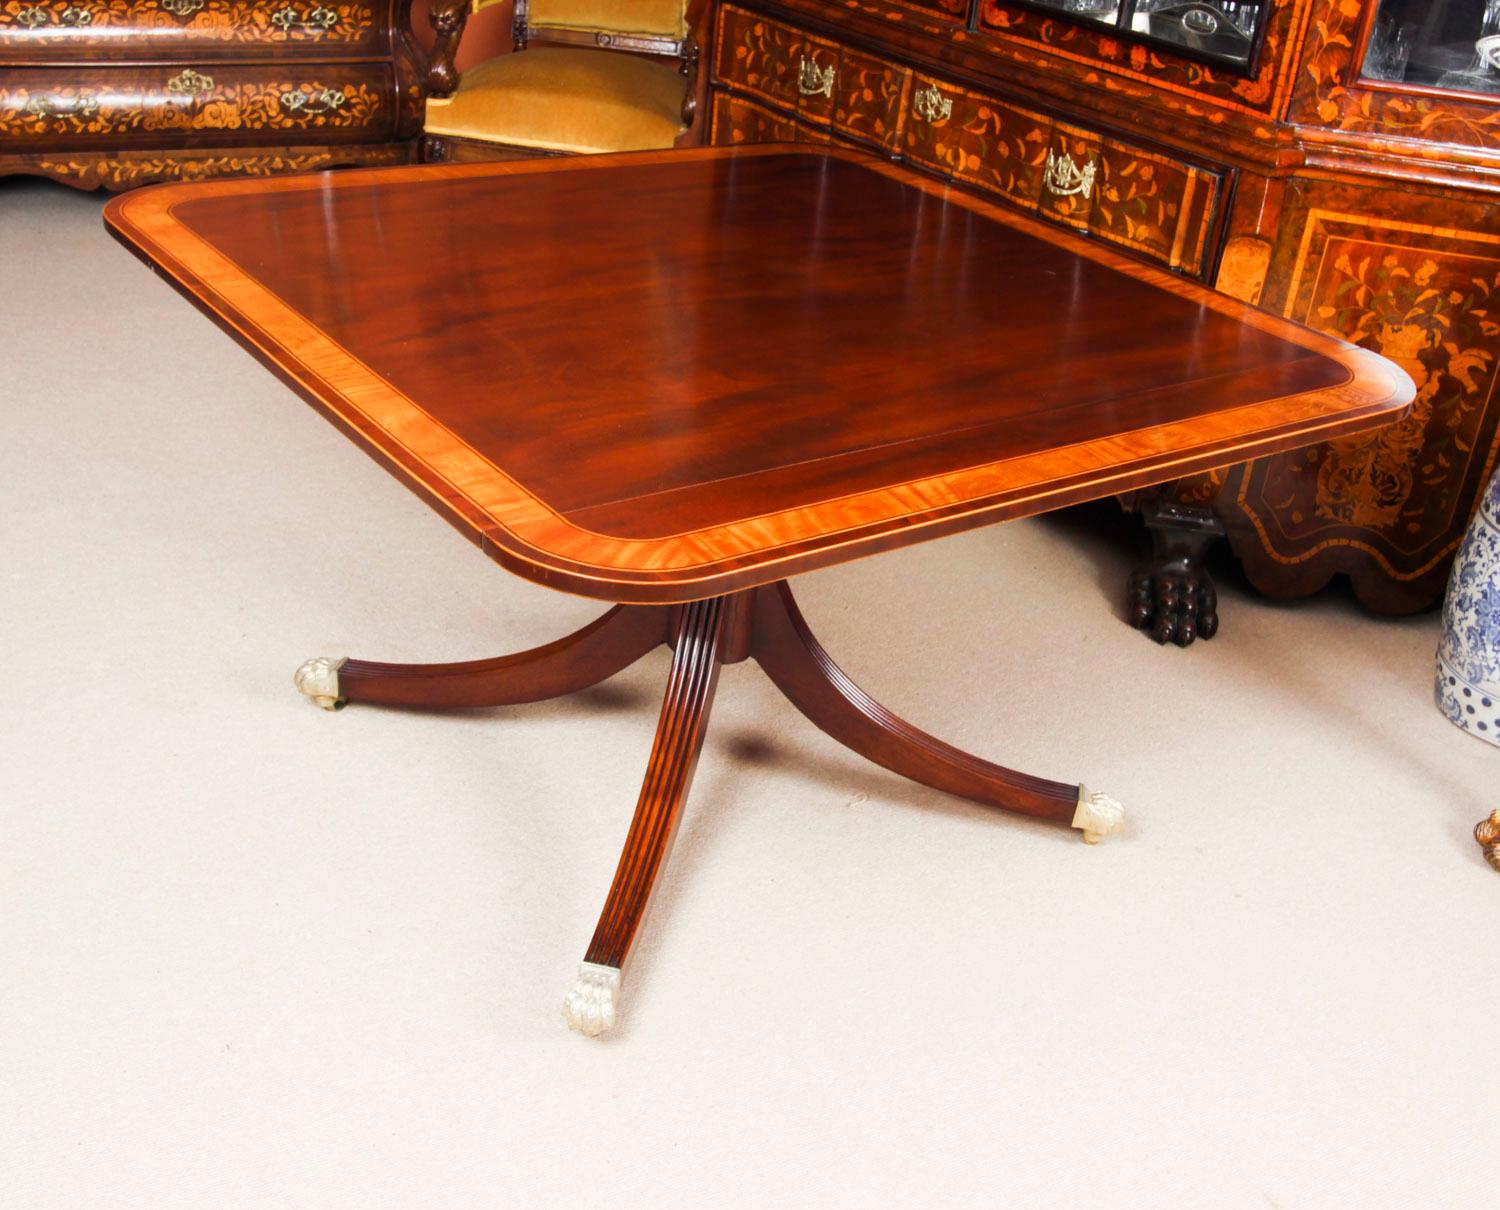 Mahogany Antique Regency Metamorphic Dining Table 19th Century and 14 Chairs